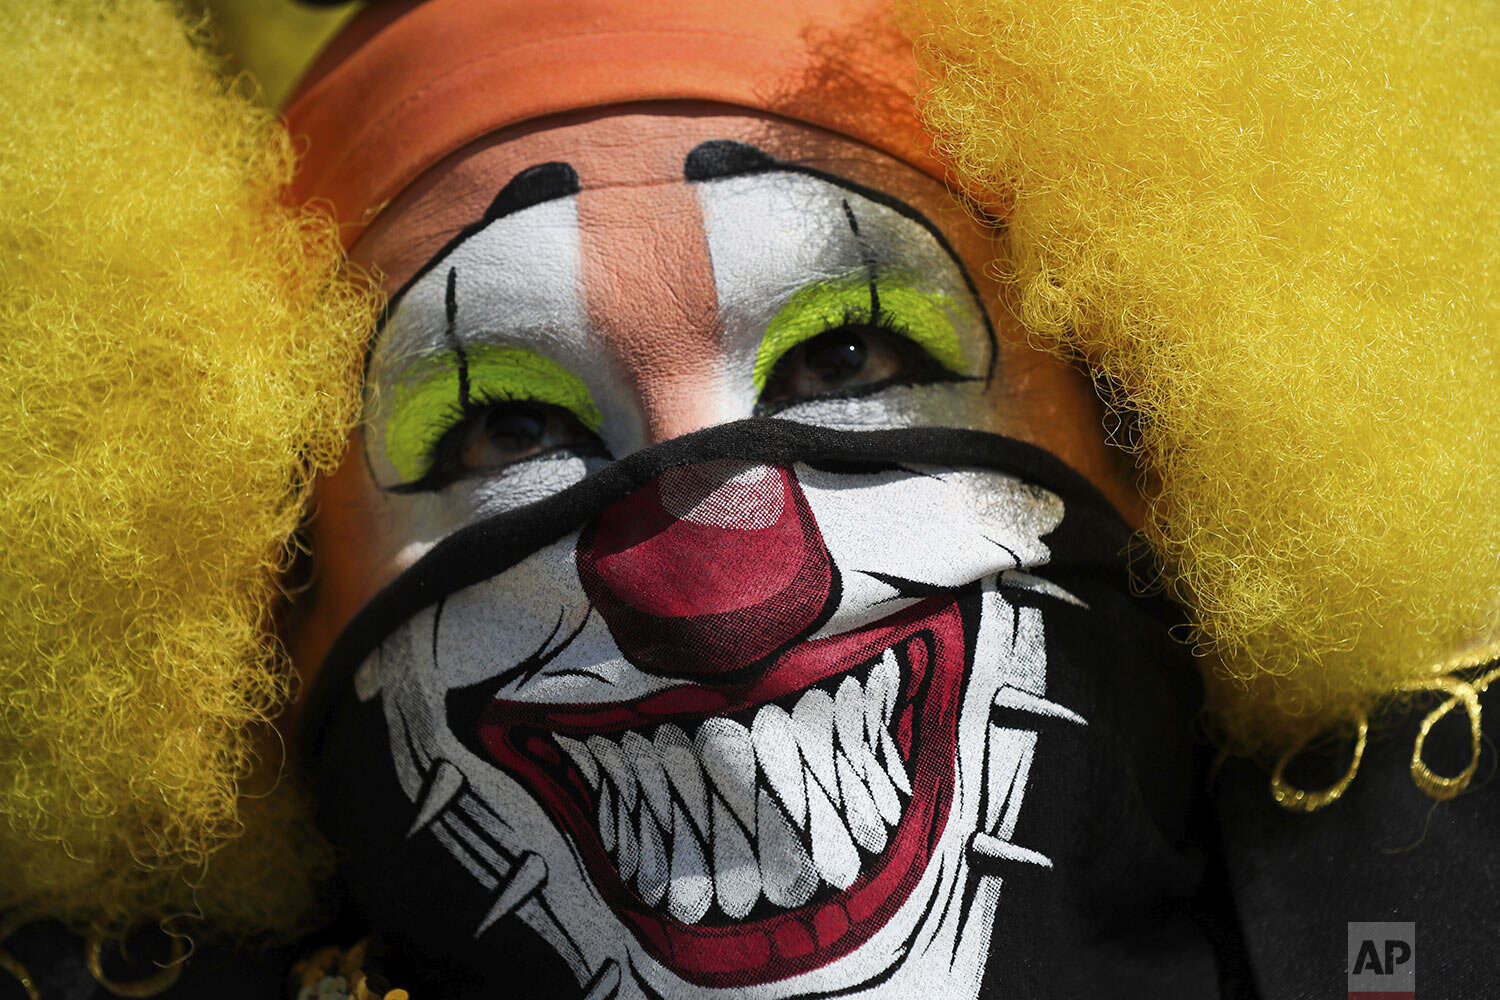  A clown wearing a decorative face mask as a precaution amid the spread of the new coronavirus protests with other clowns against restrictions keeping them from working in the streets of Mexico City, Thursday, April 30, 2020. (AP Photo/Fernando Llano